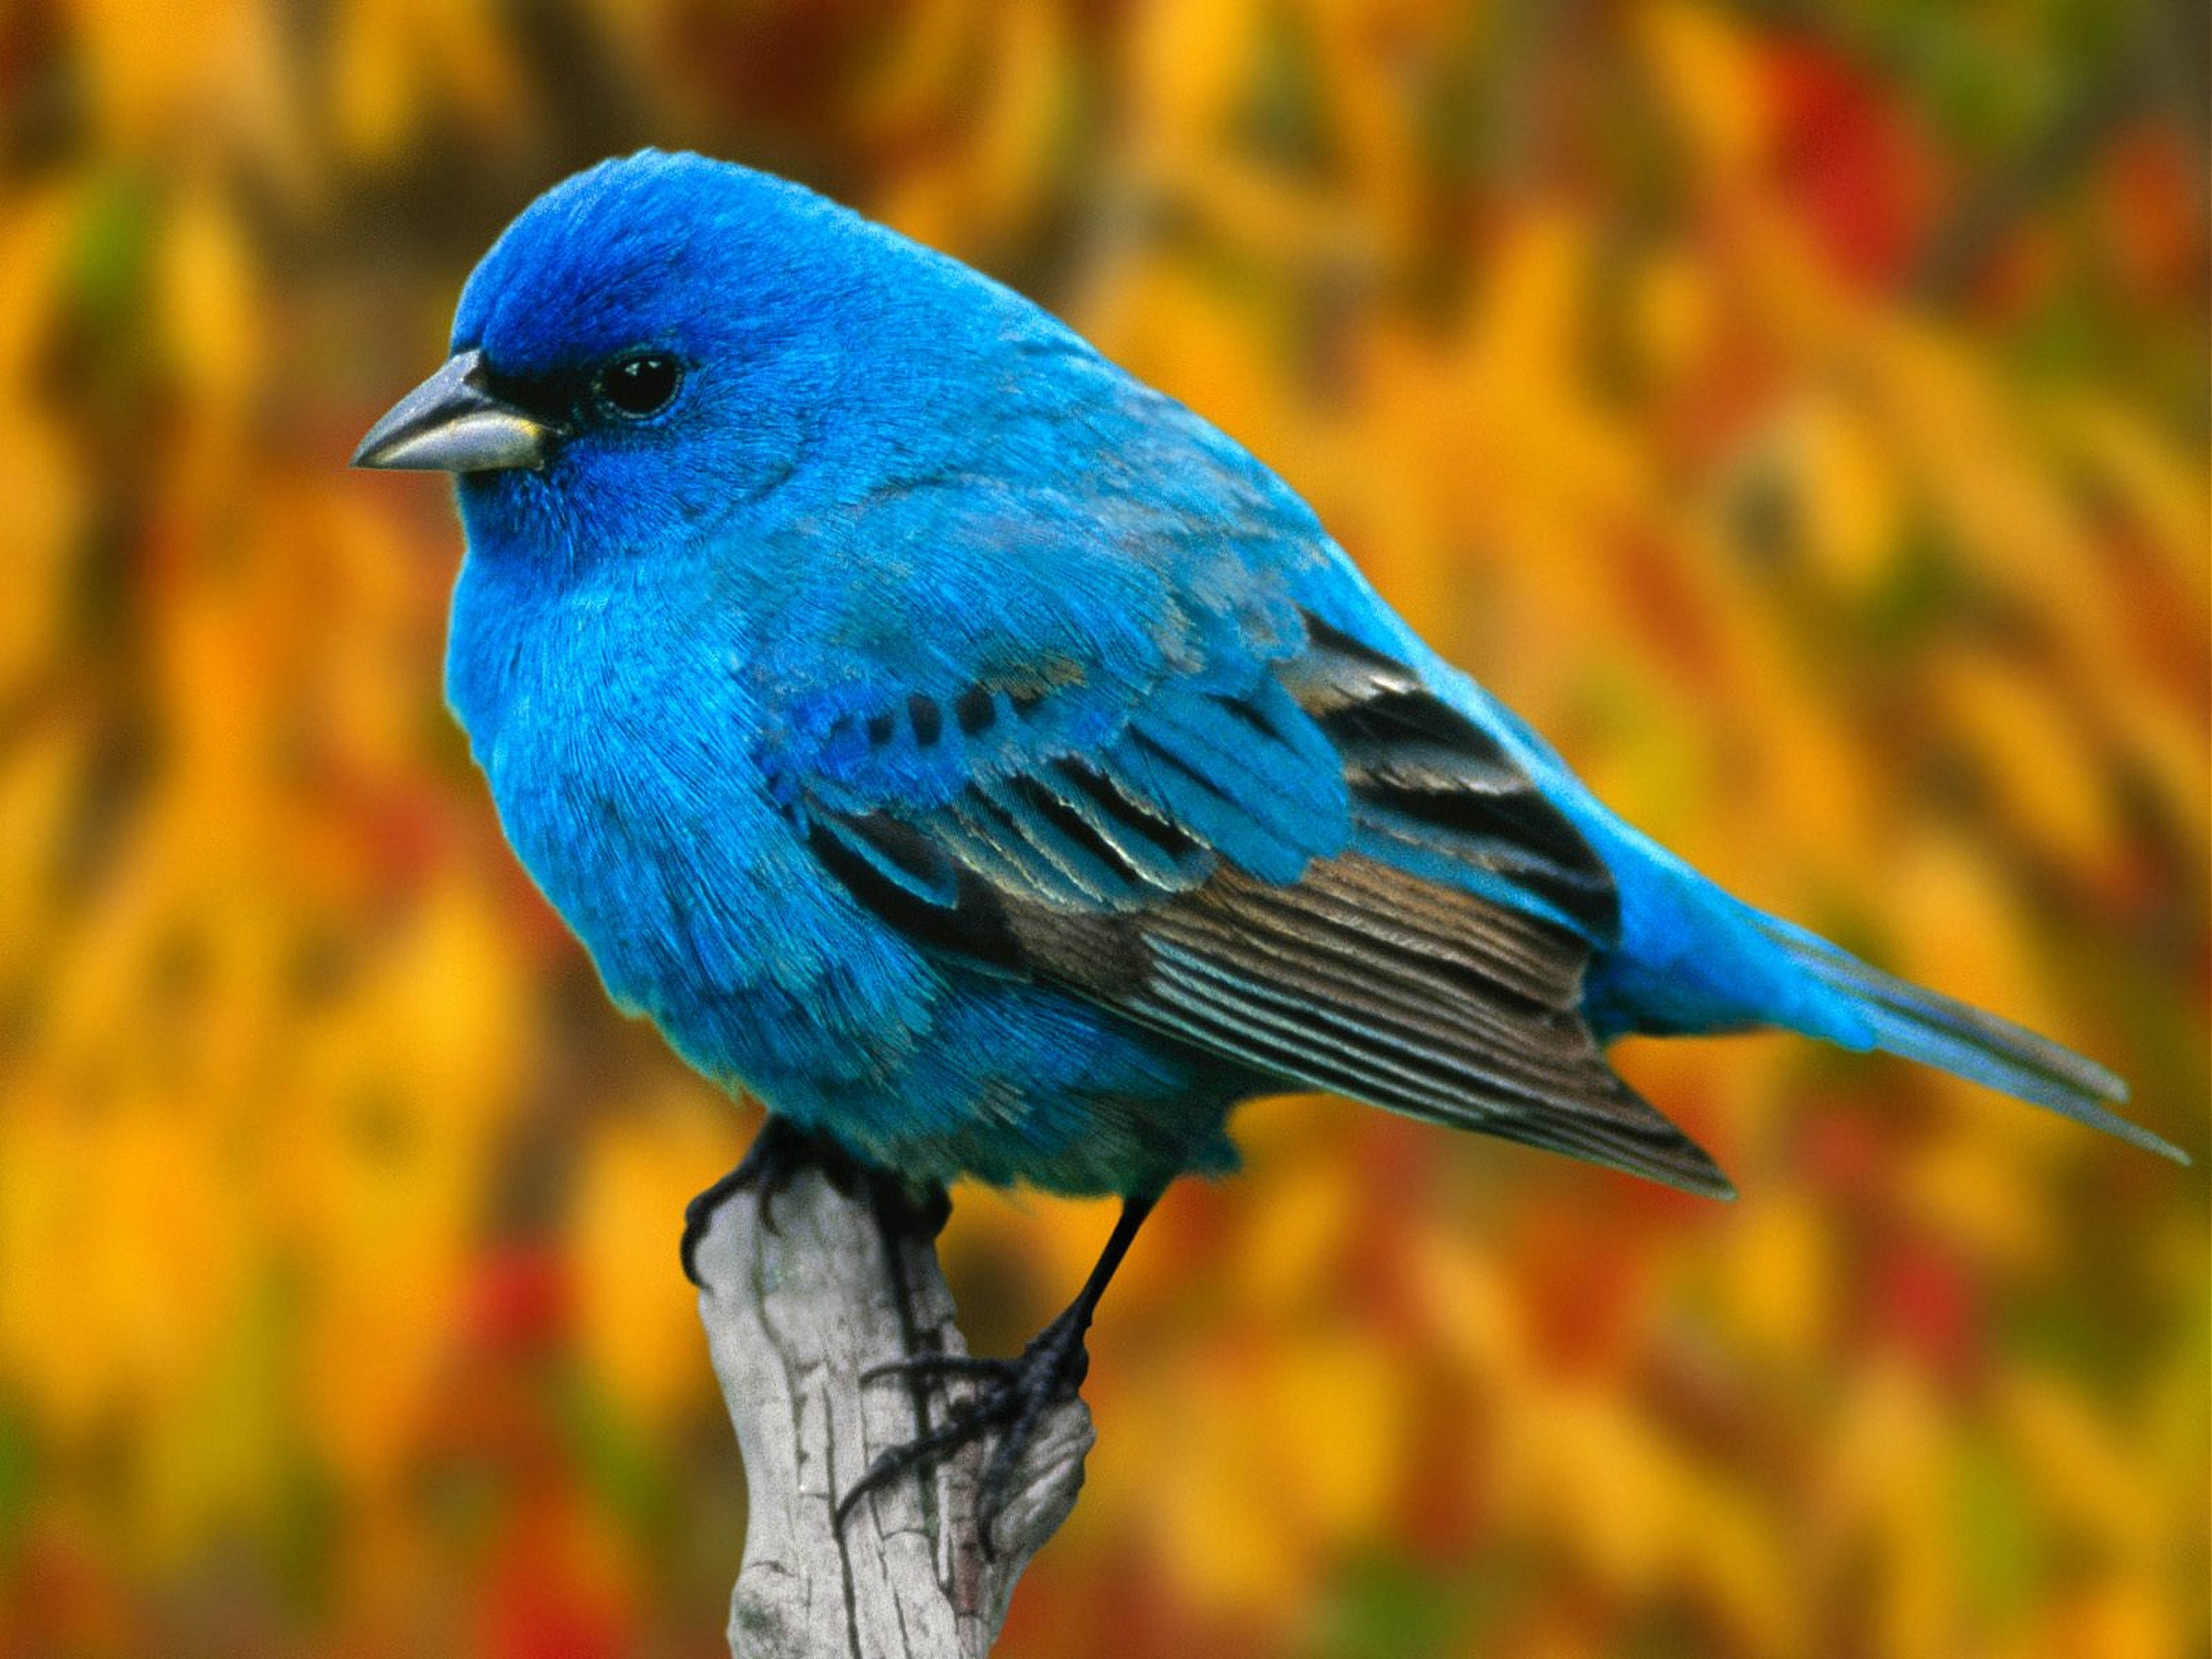 A bird with blue feathers